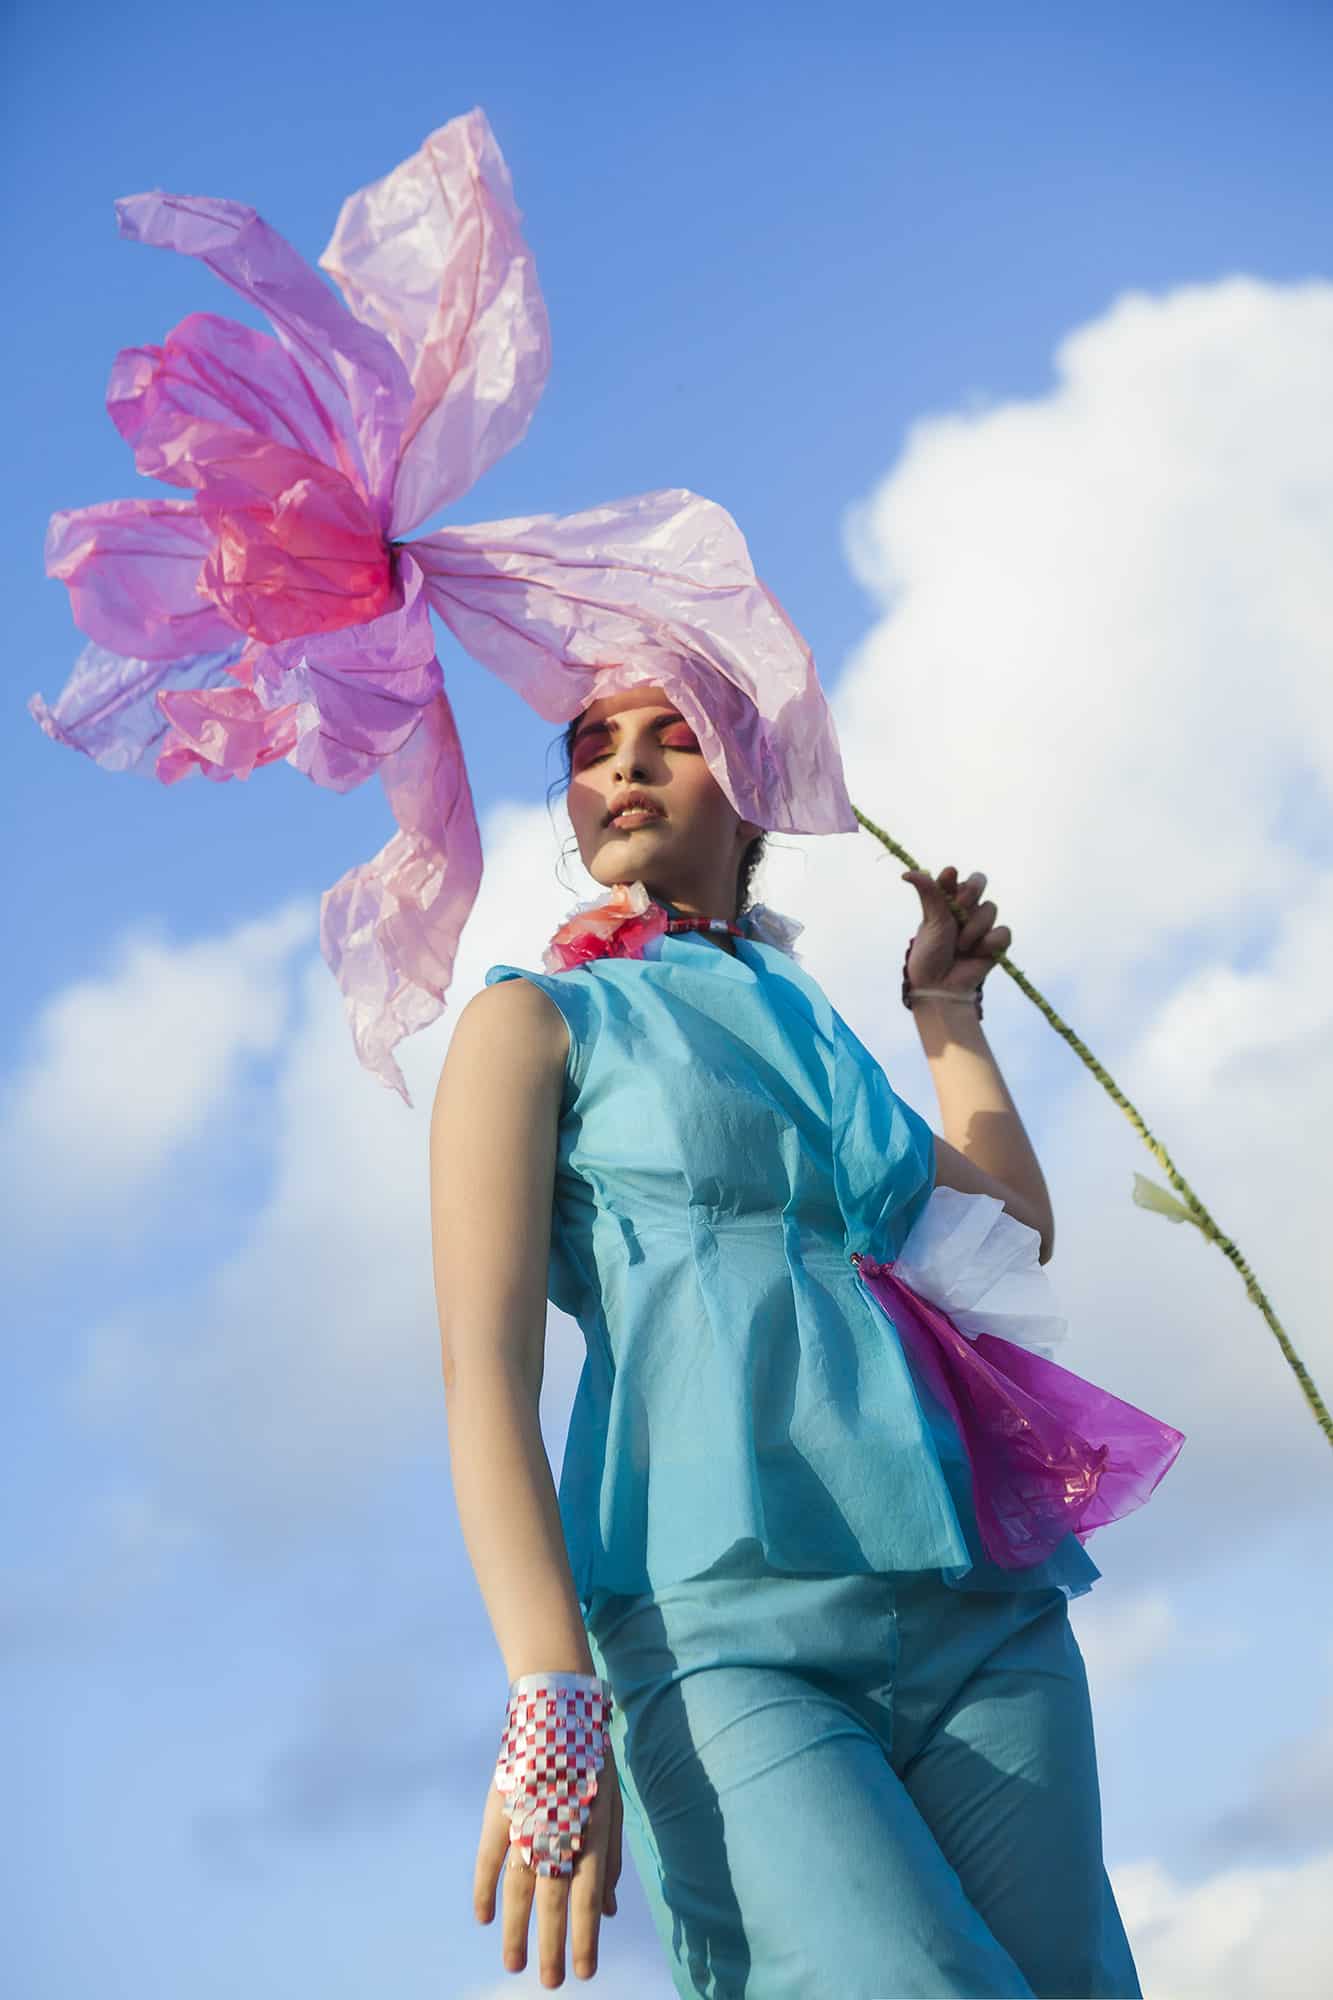 A Fantastic Plastic Photoshoot For Plastic Free July